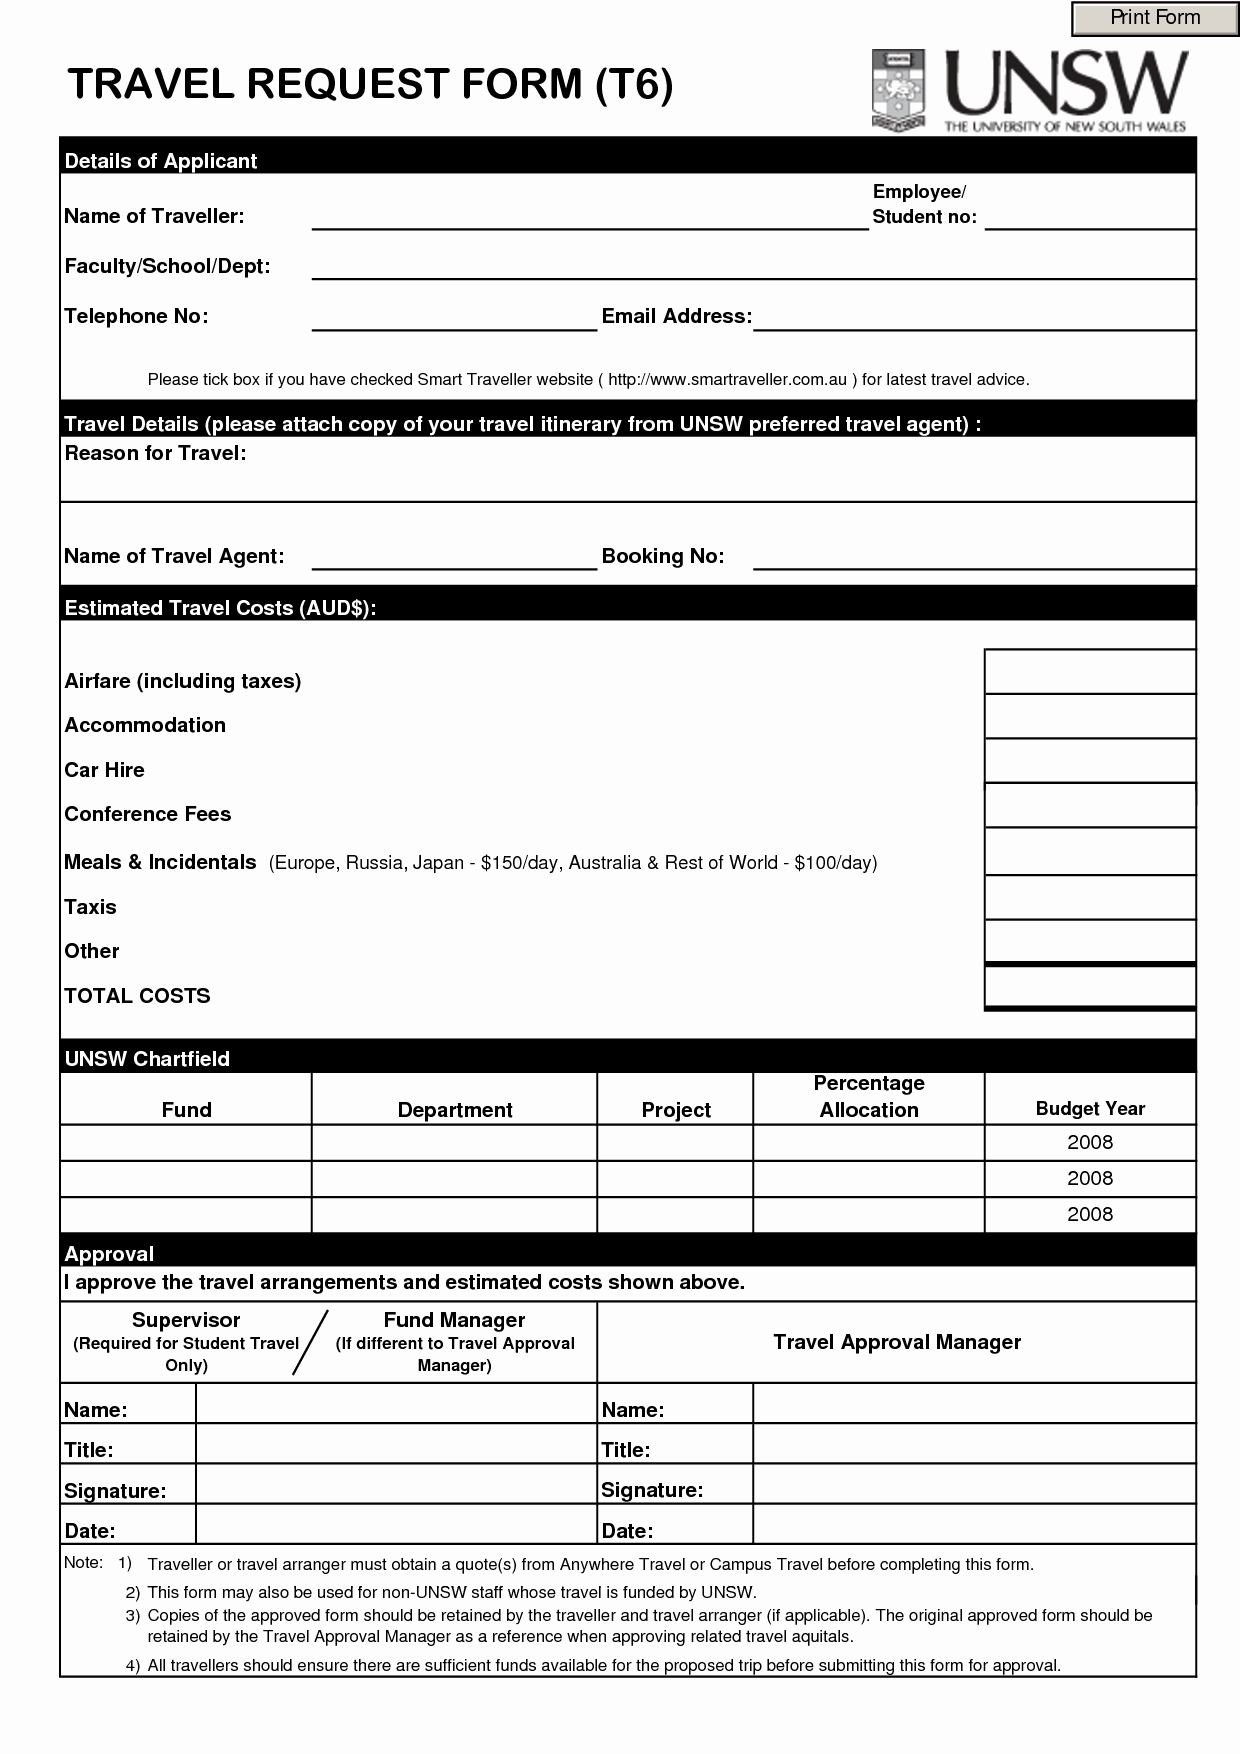 Travel Request form Template Excel Awesome 5 Best Of Business Travel Request form Template